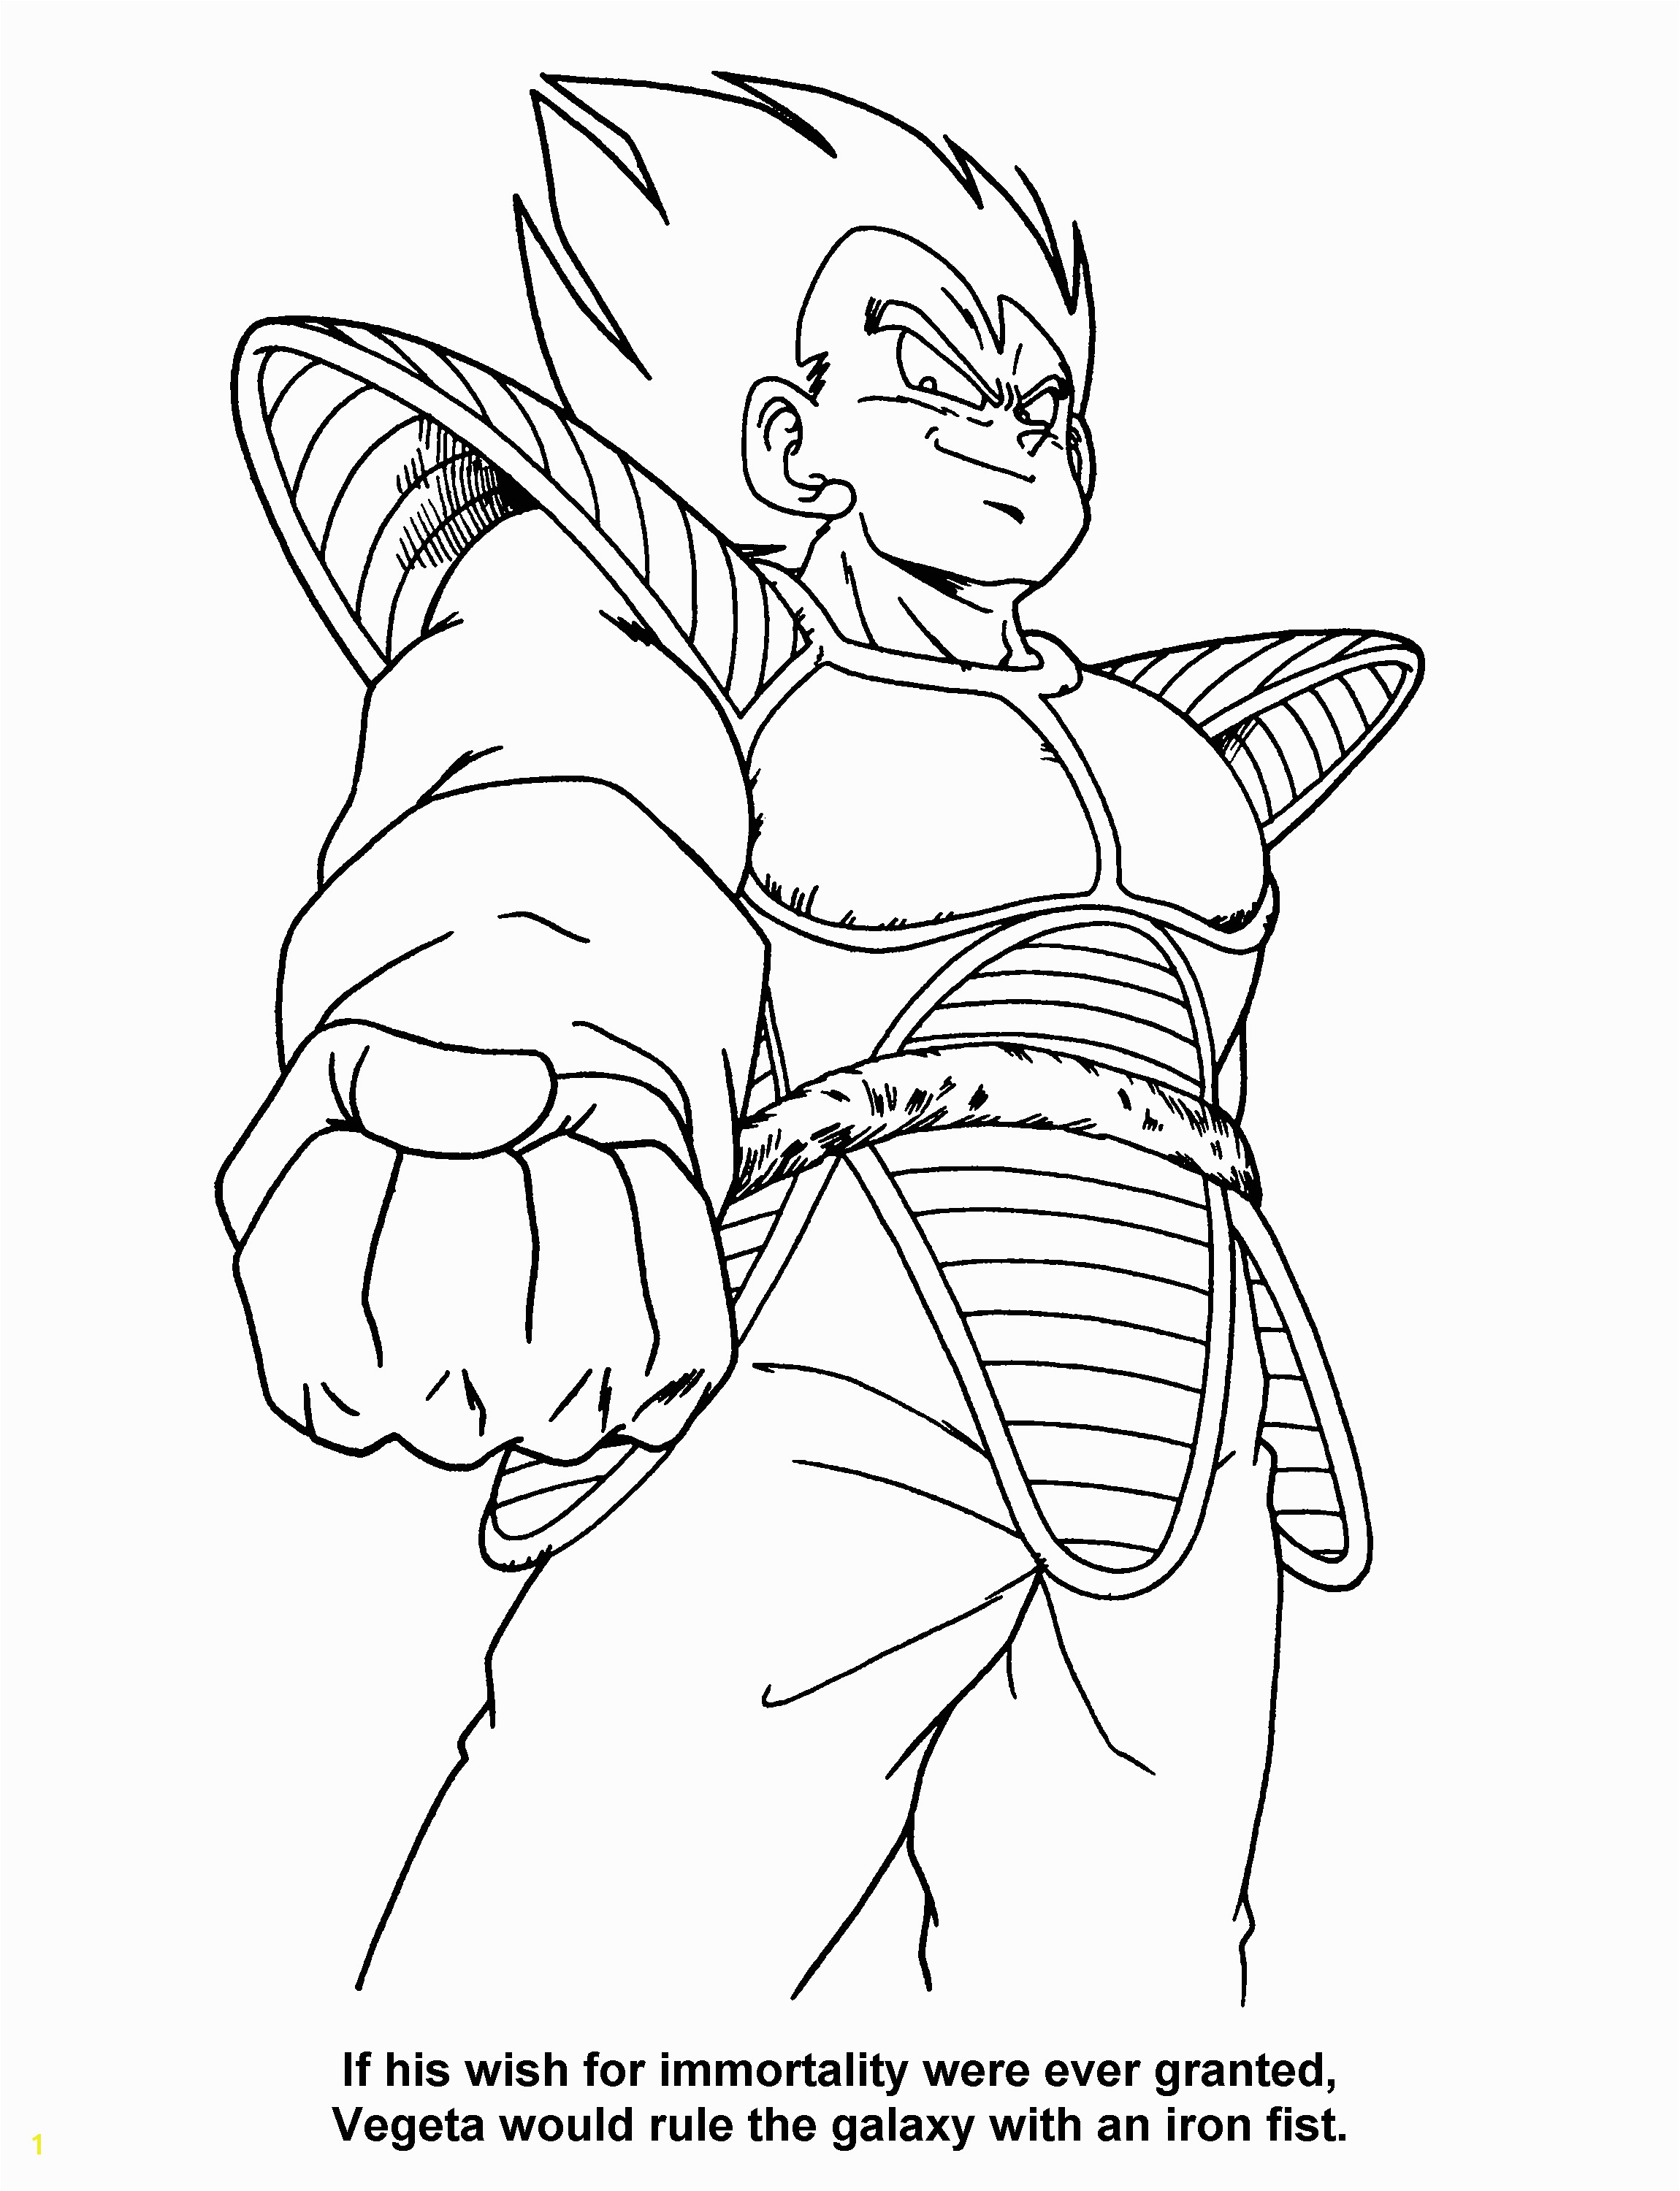 Dragon Ball Z Coloring Page Dragon Ball Z Coloring Pages Coloringpages1001